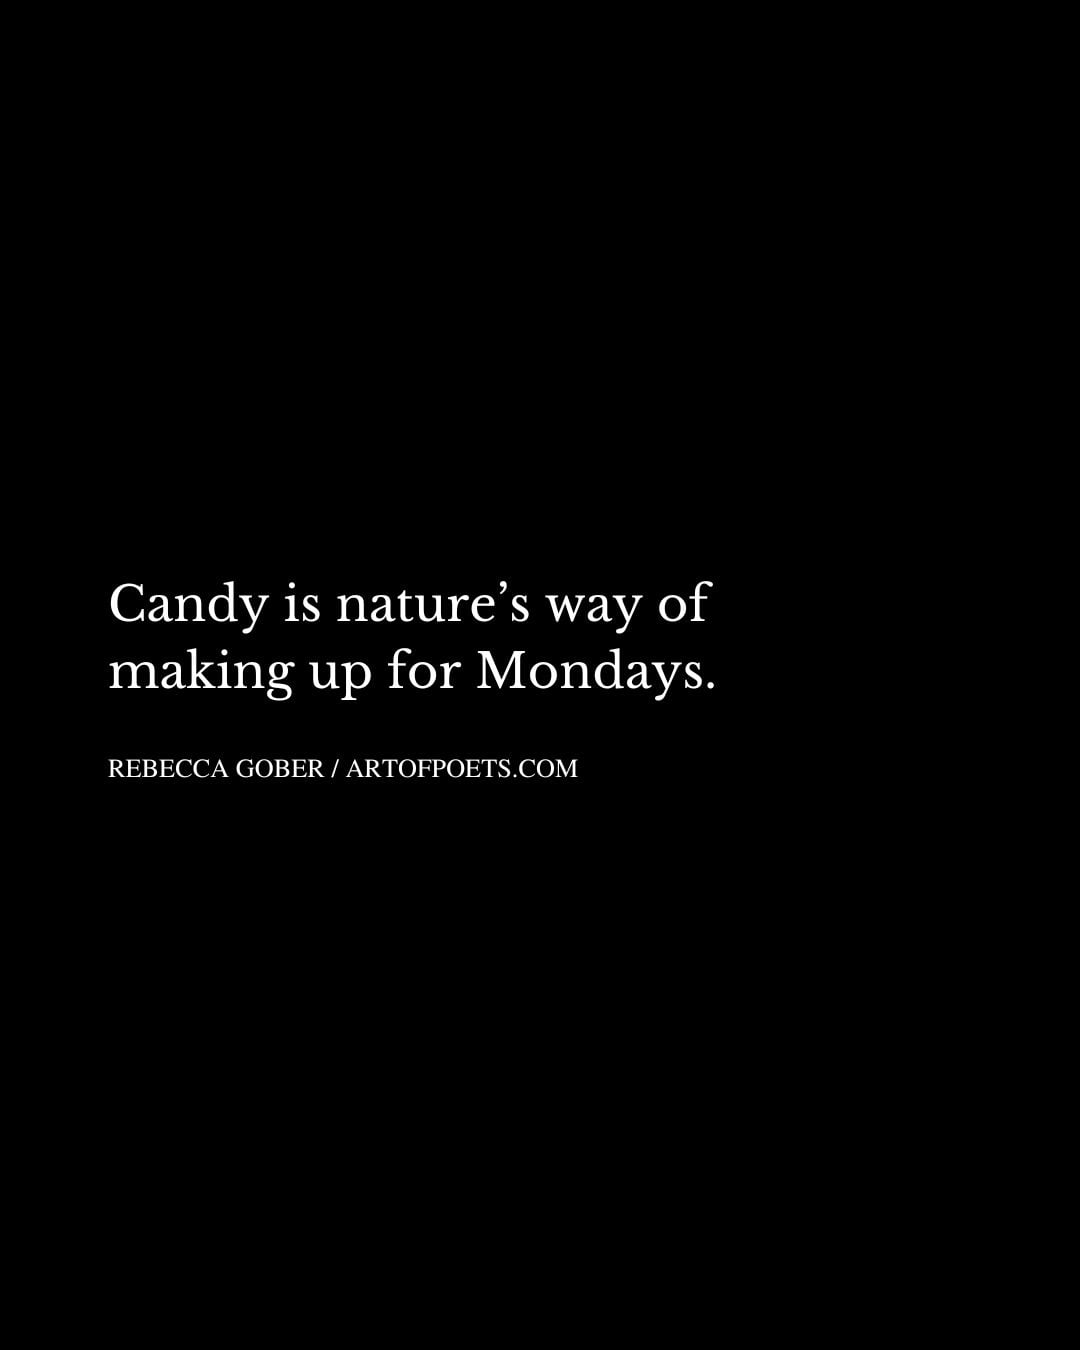 Candy is natures way of making up for Mondays